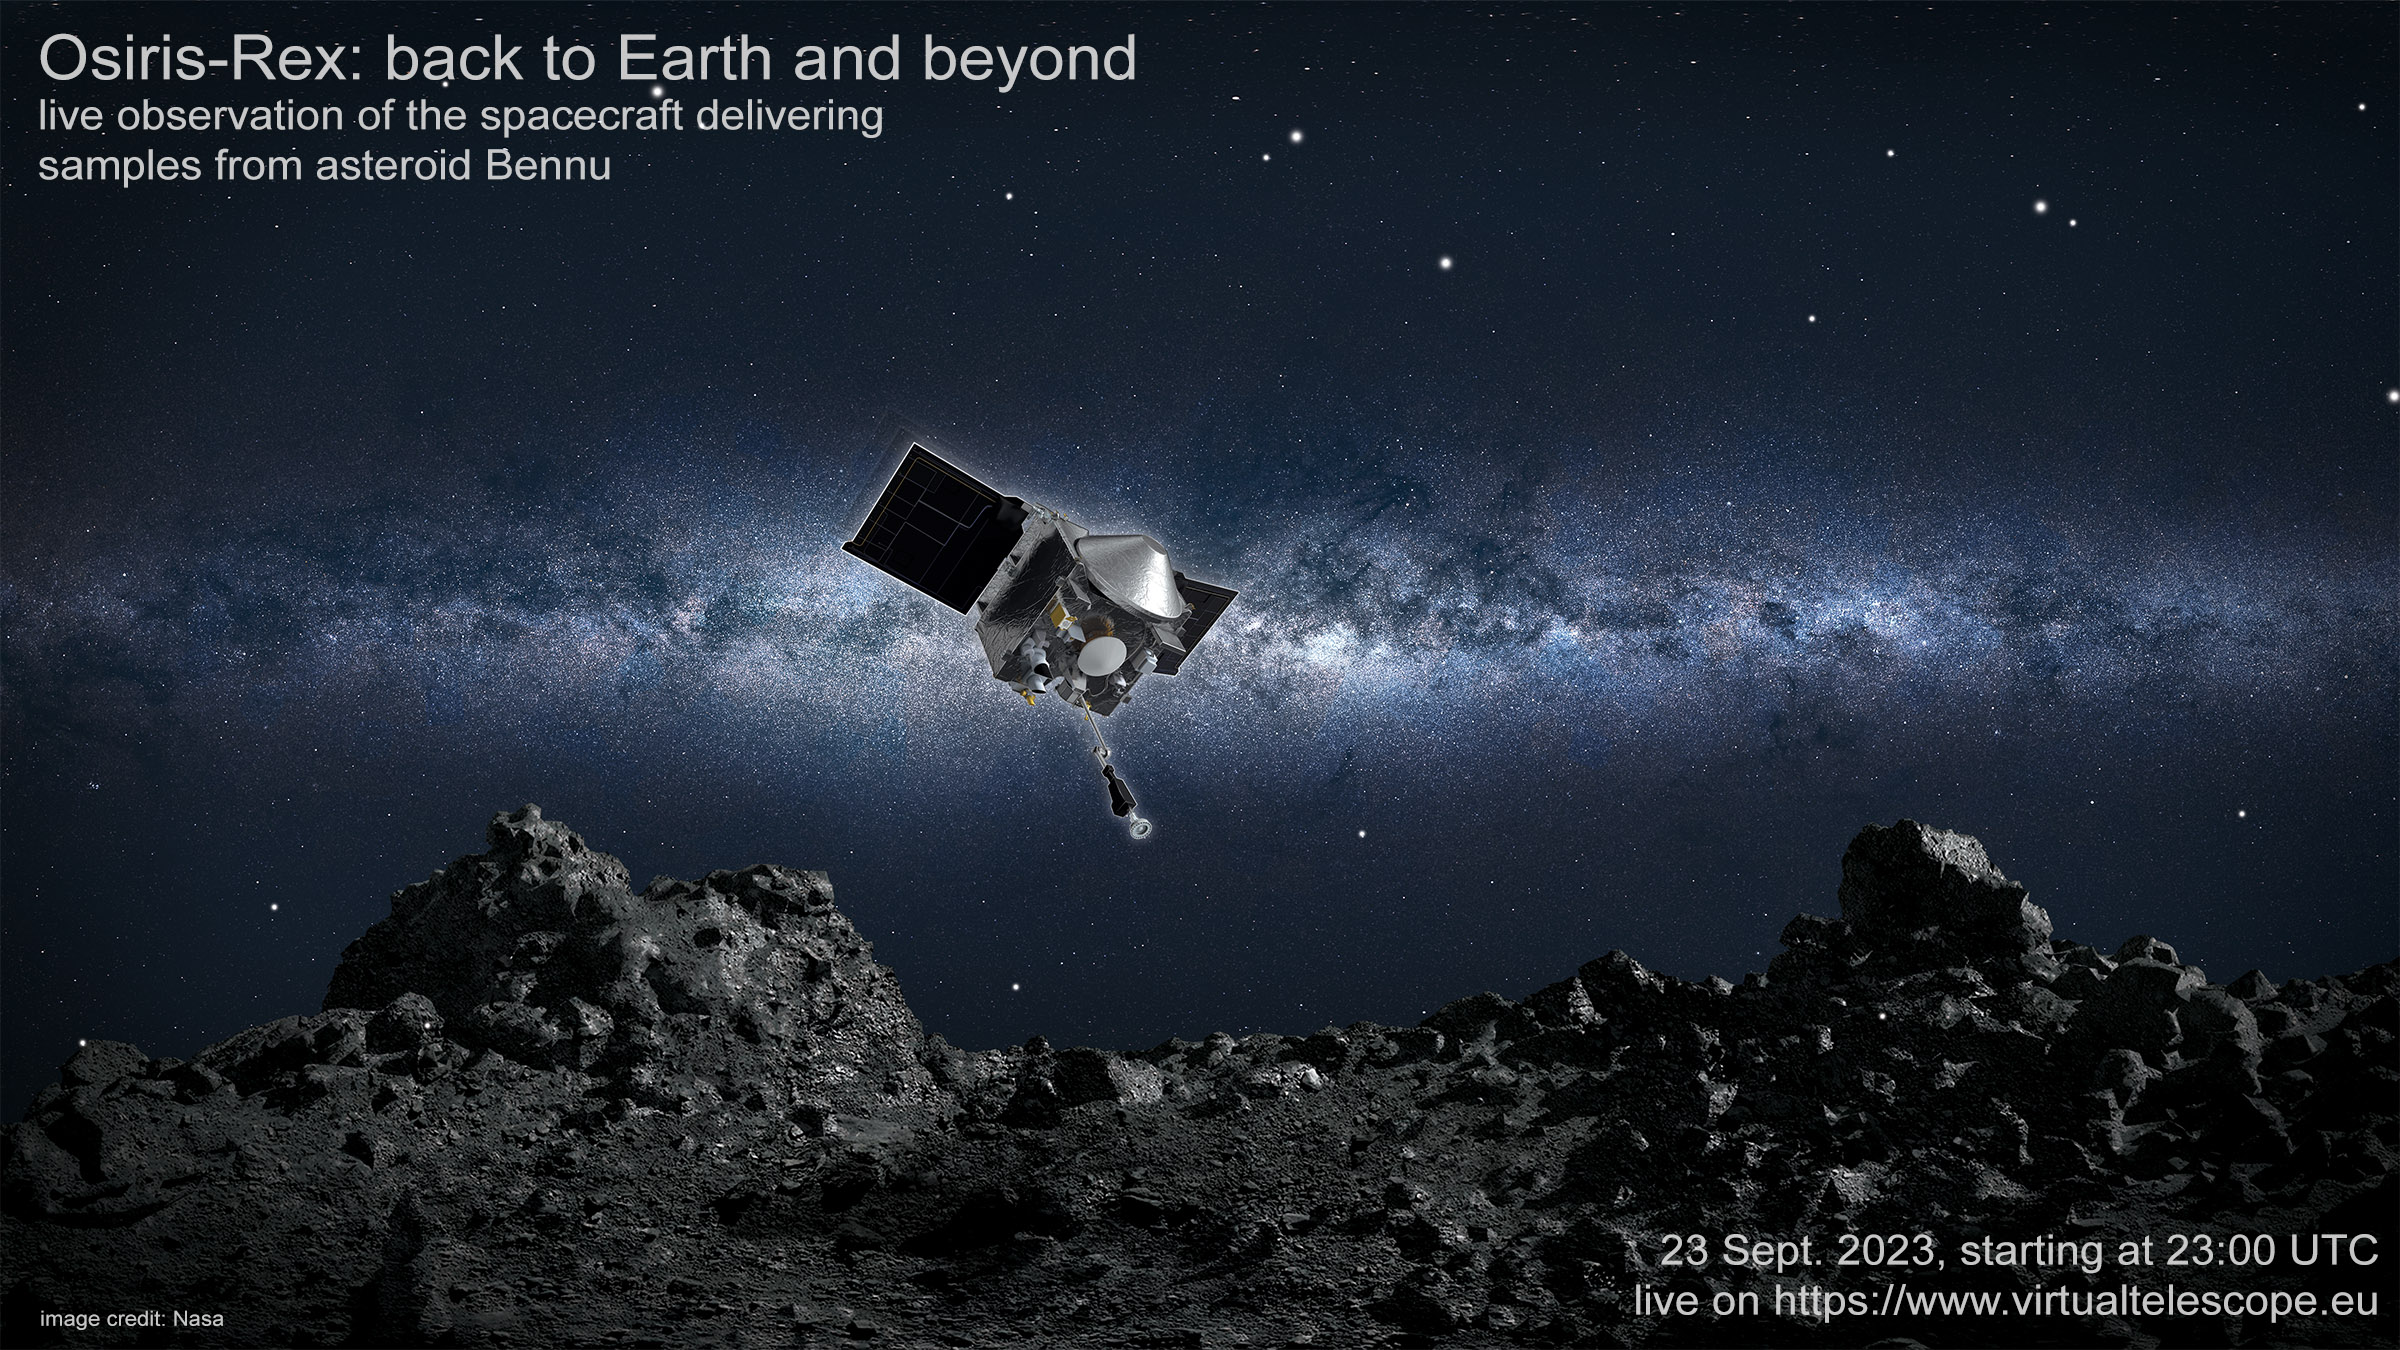 Osiris-Rex: back to Earth and beyond - poster of the event.